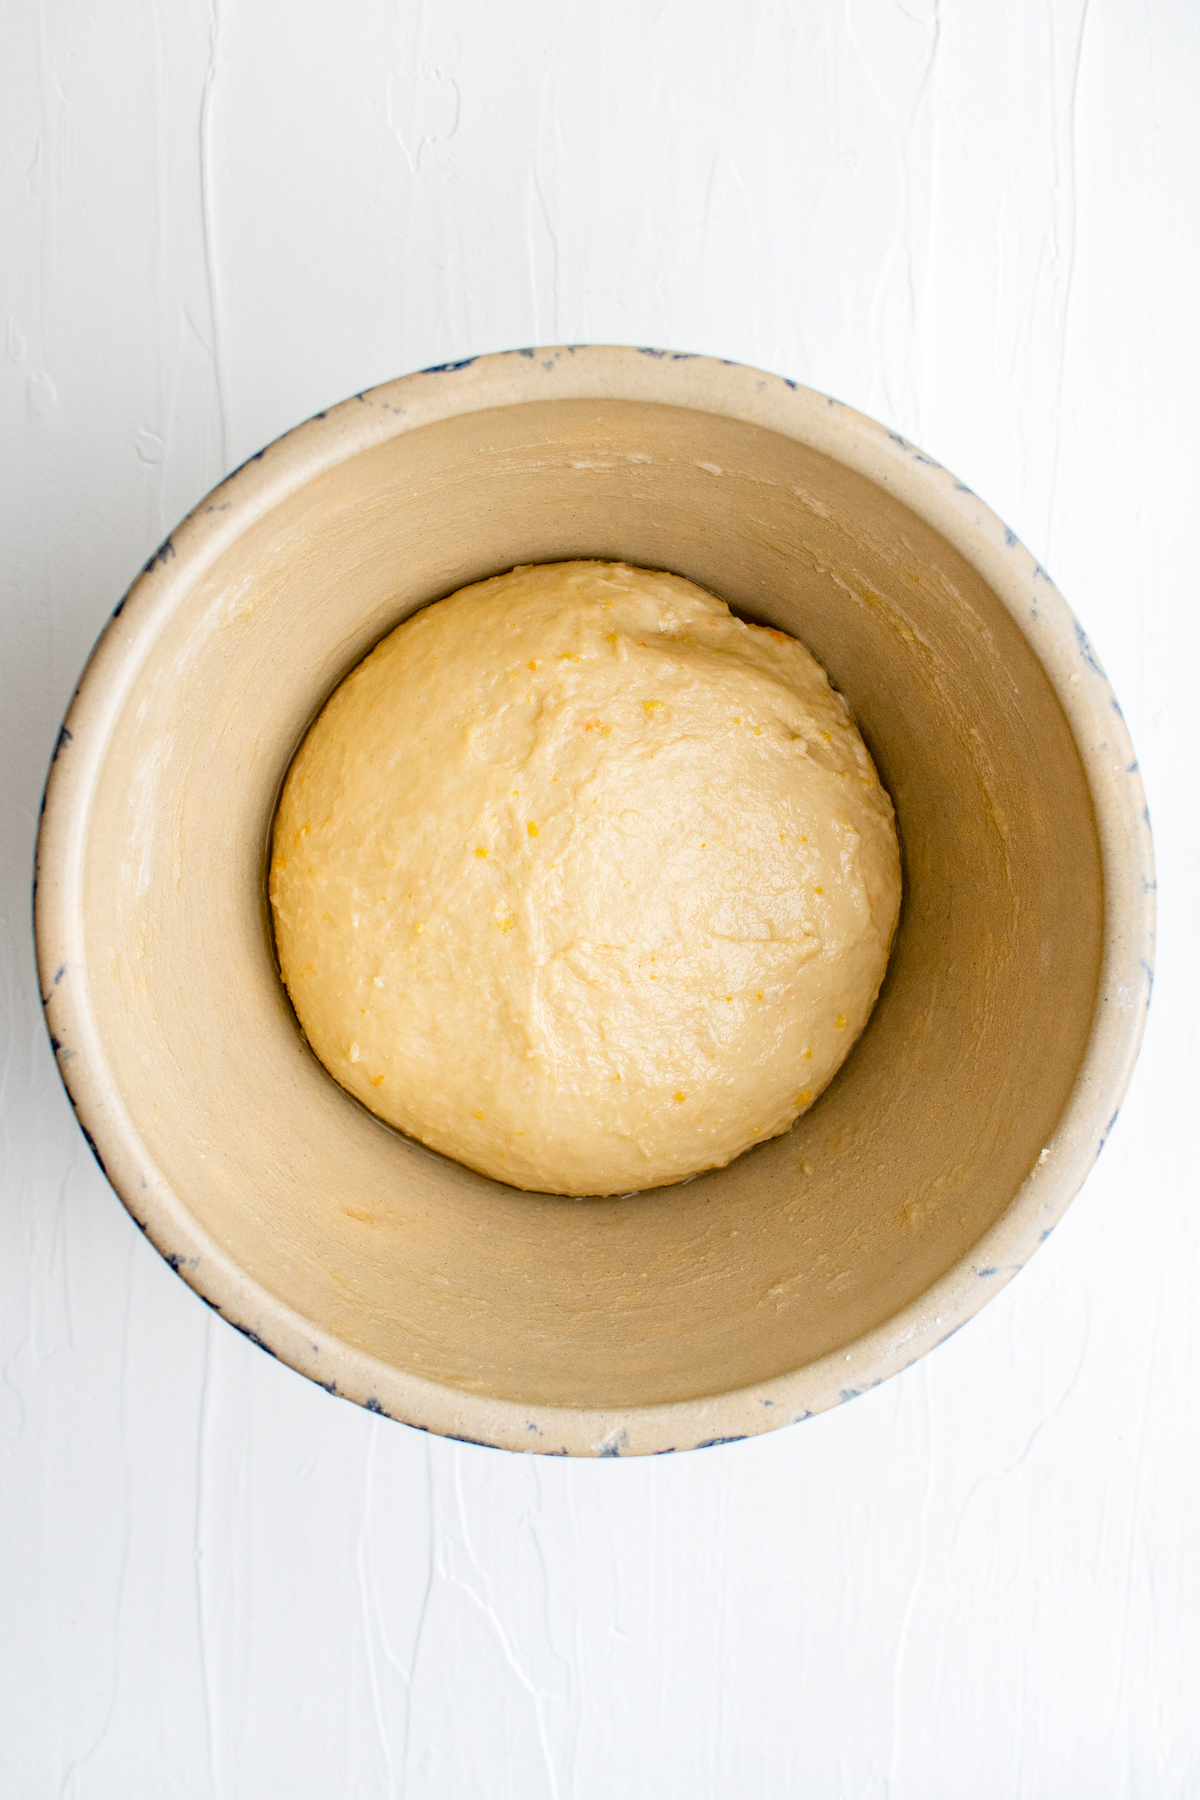 Rolled dough resting in a bowl. 